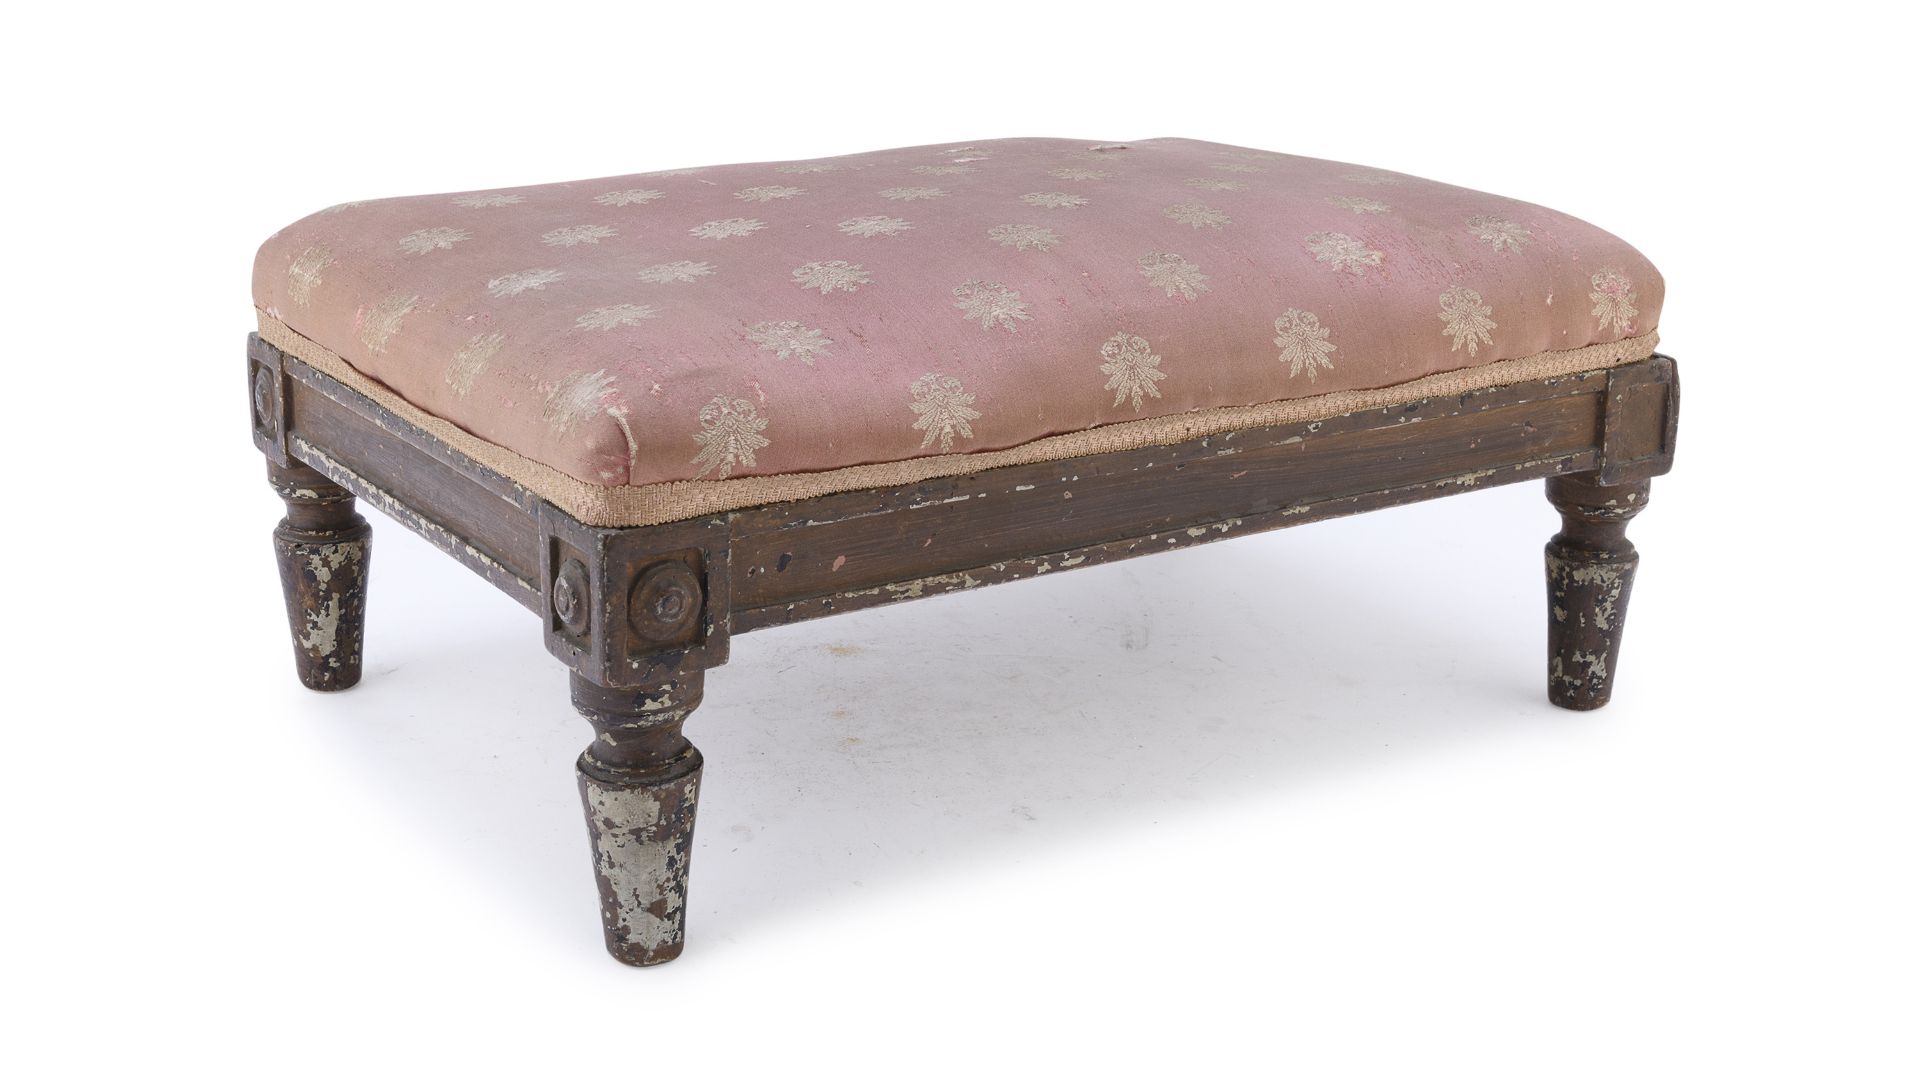 FOOTREST IN LACQUERED WOOD LATE 18th CENTURY